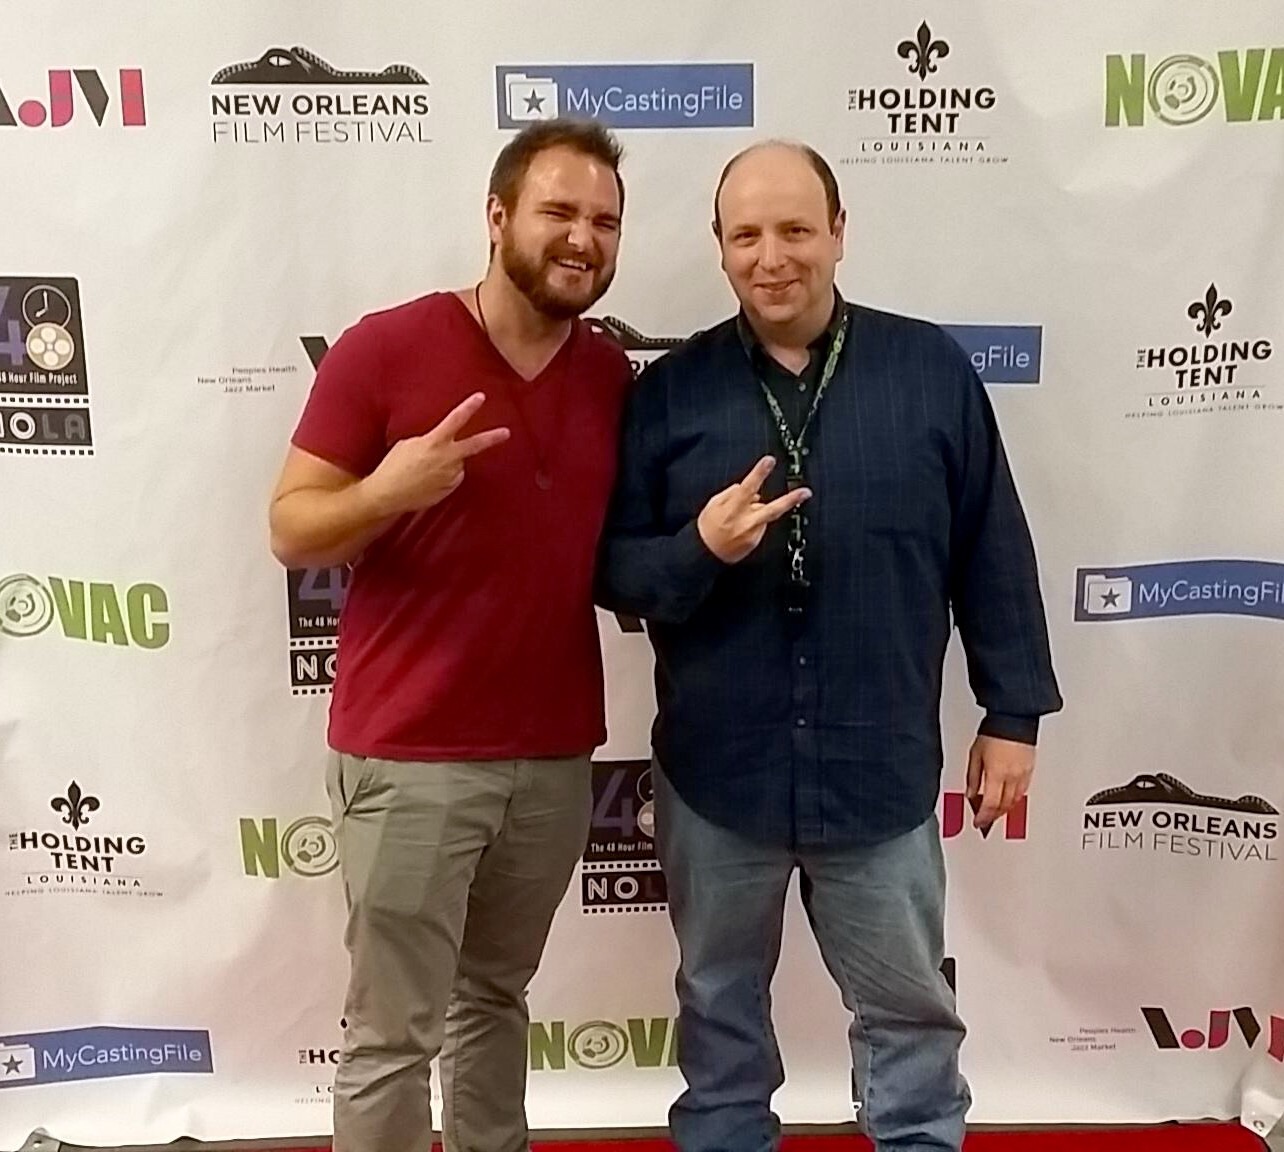 Scott Nichols and I at the 48 hour film Festival in New Orleans